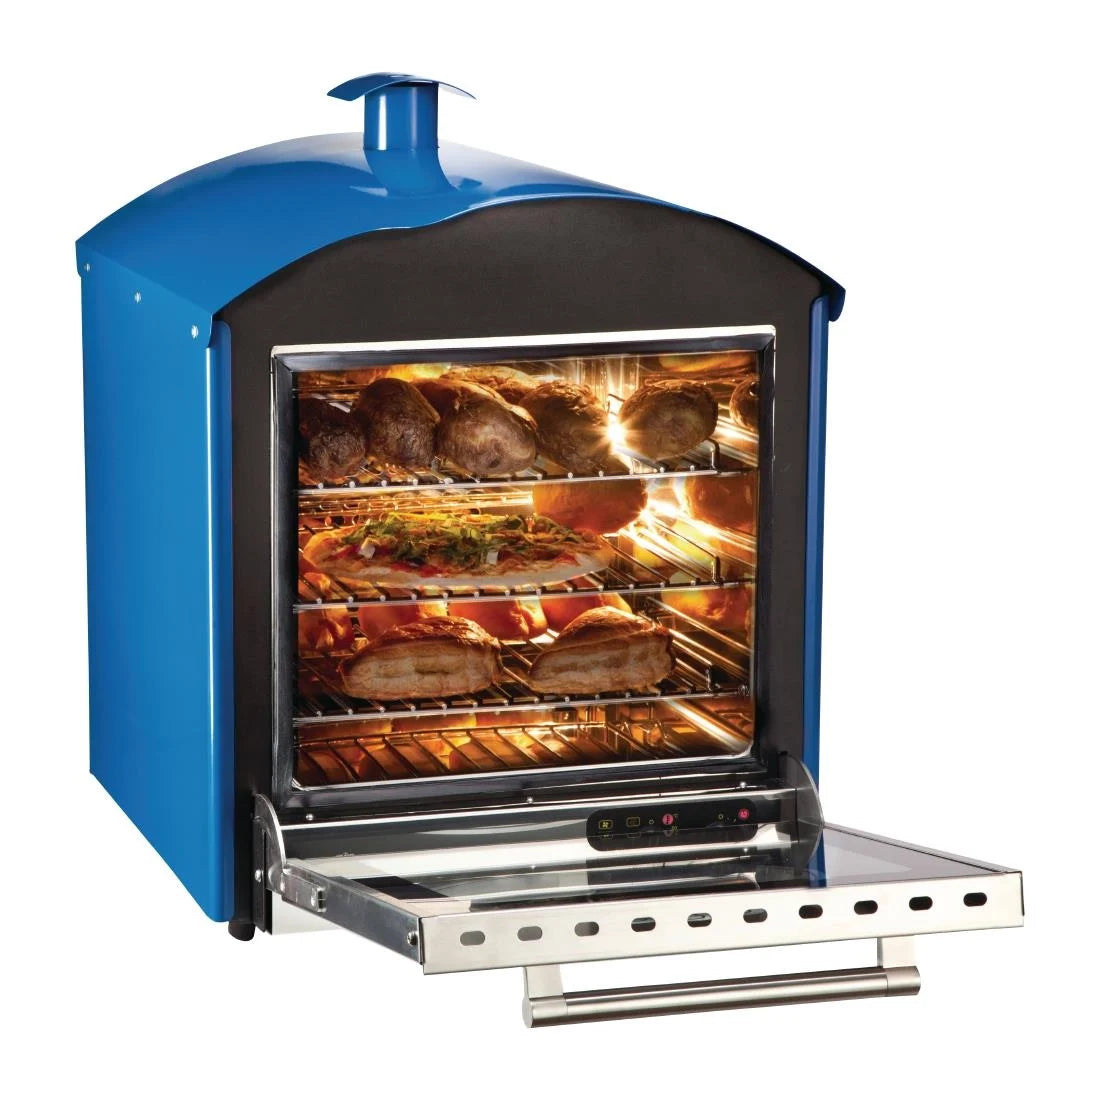 King Edward Bake King Solo Oven Stainless Steel BKS-BLU.Product Ref:00677.Model:BKS-BLU. 🚚 3-5 Days Delivery